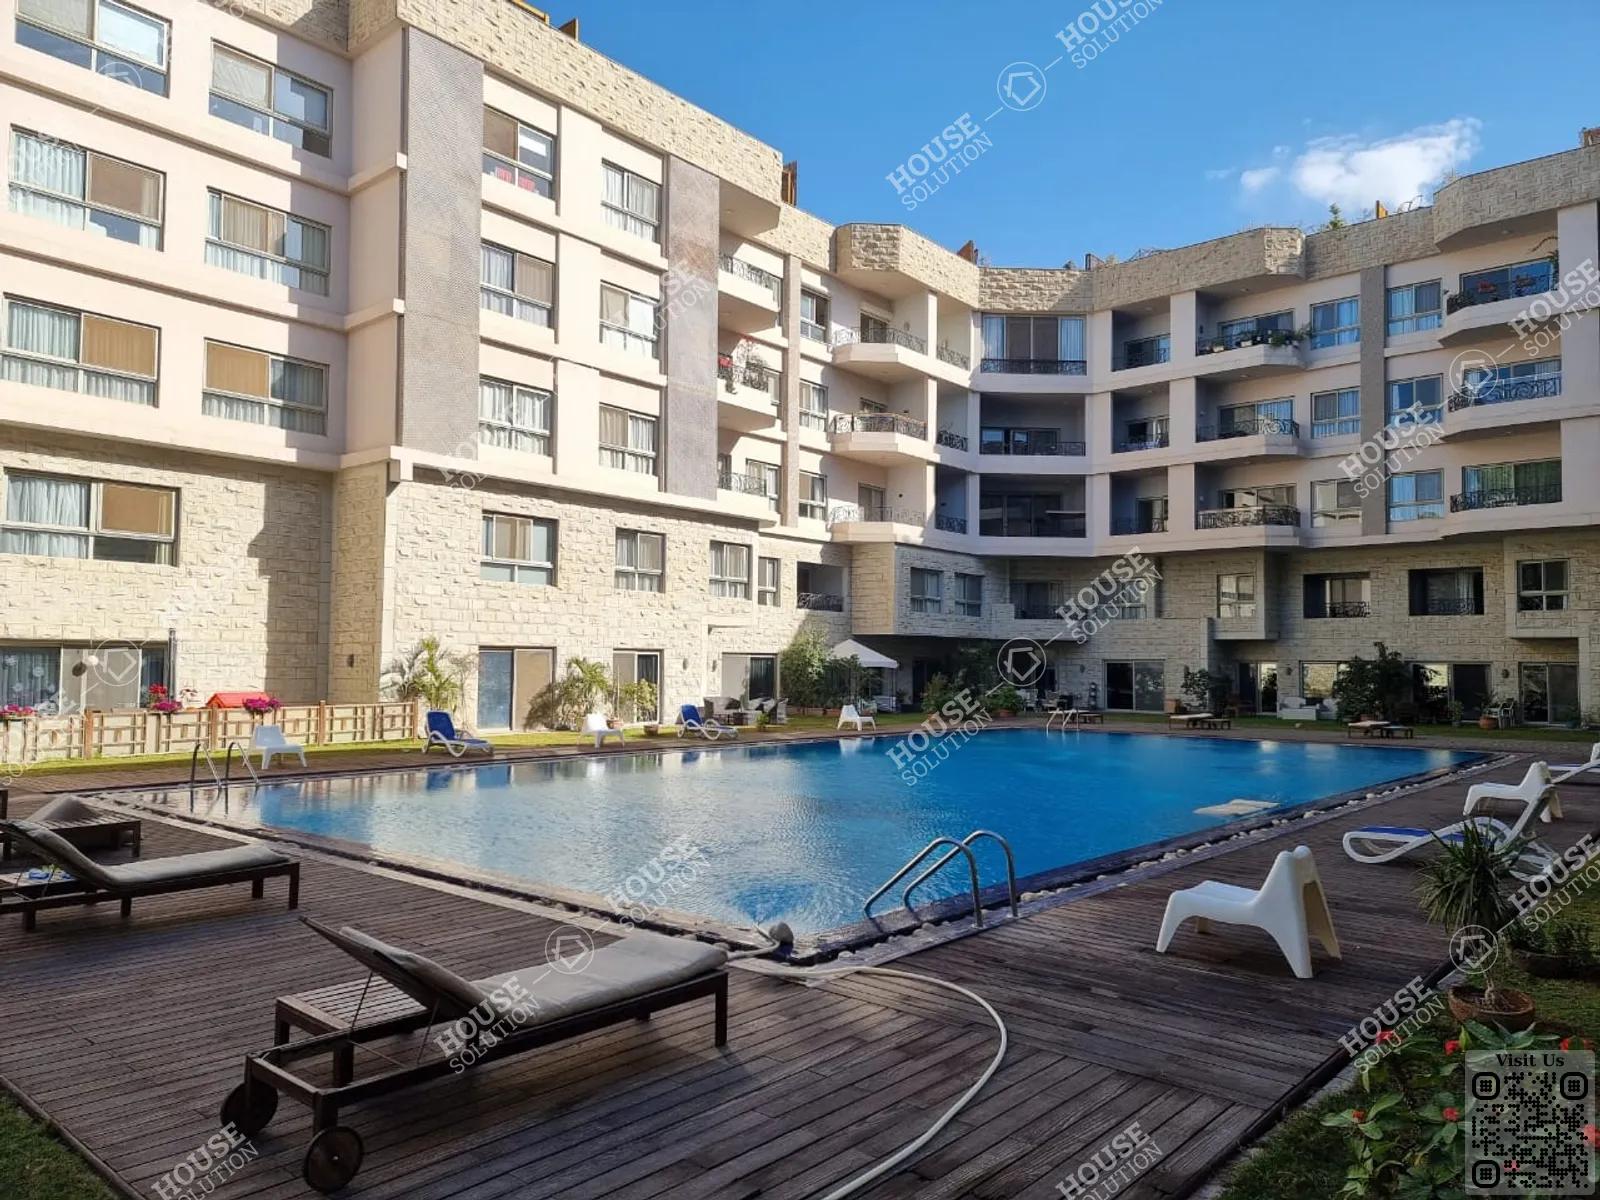 SHARED SWIMMING POOL  @ Apartments For Rent In Maadi Maadi Sarayat Area: 340 m² consists of 4 Bedrooms 4 Bathrooms Modern furnished 5 stars #5684-2